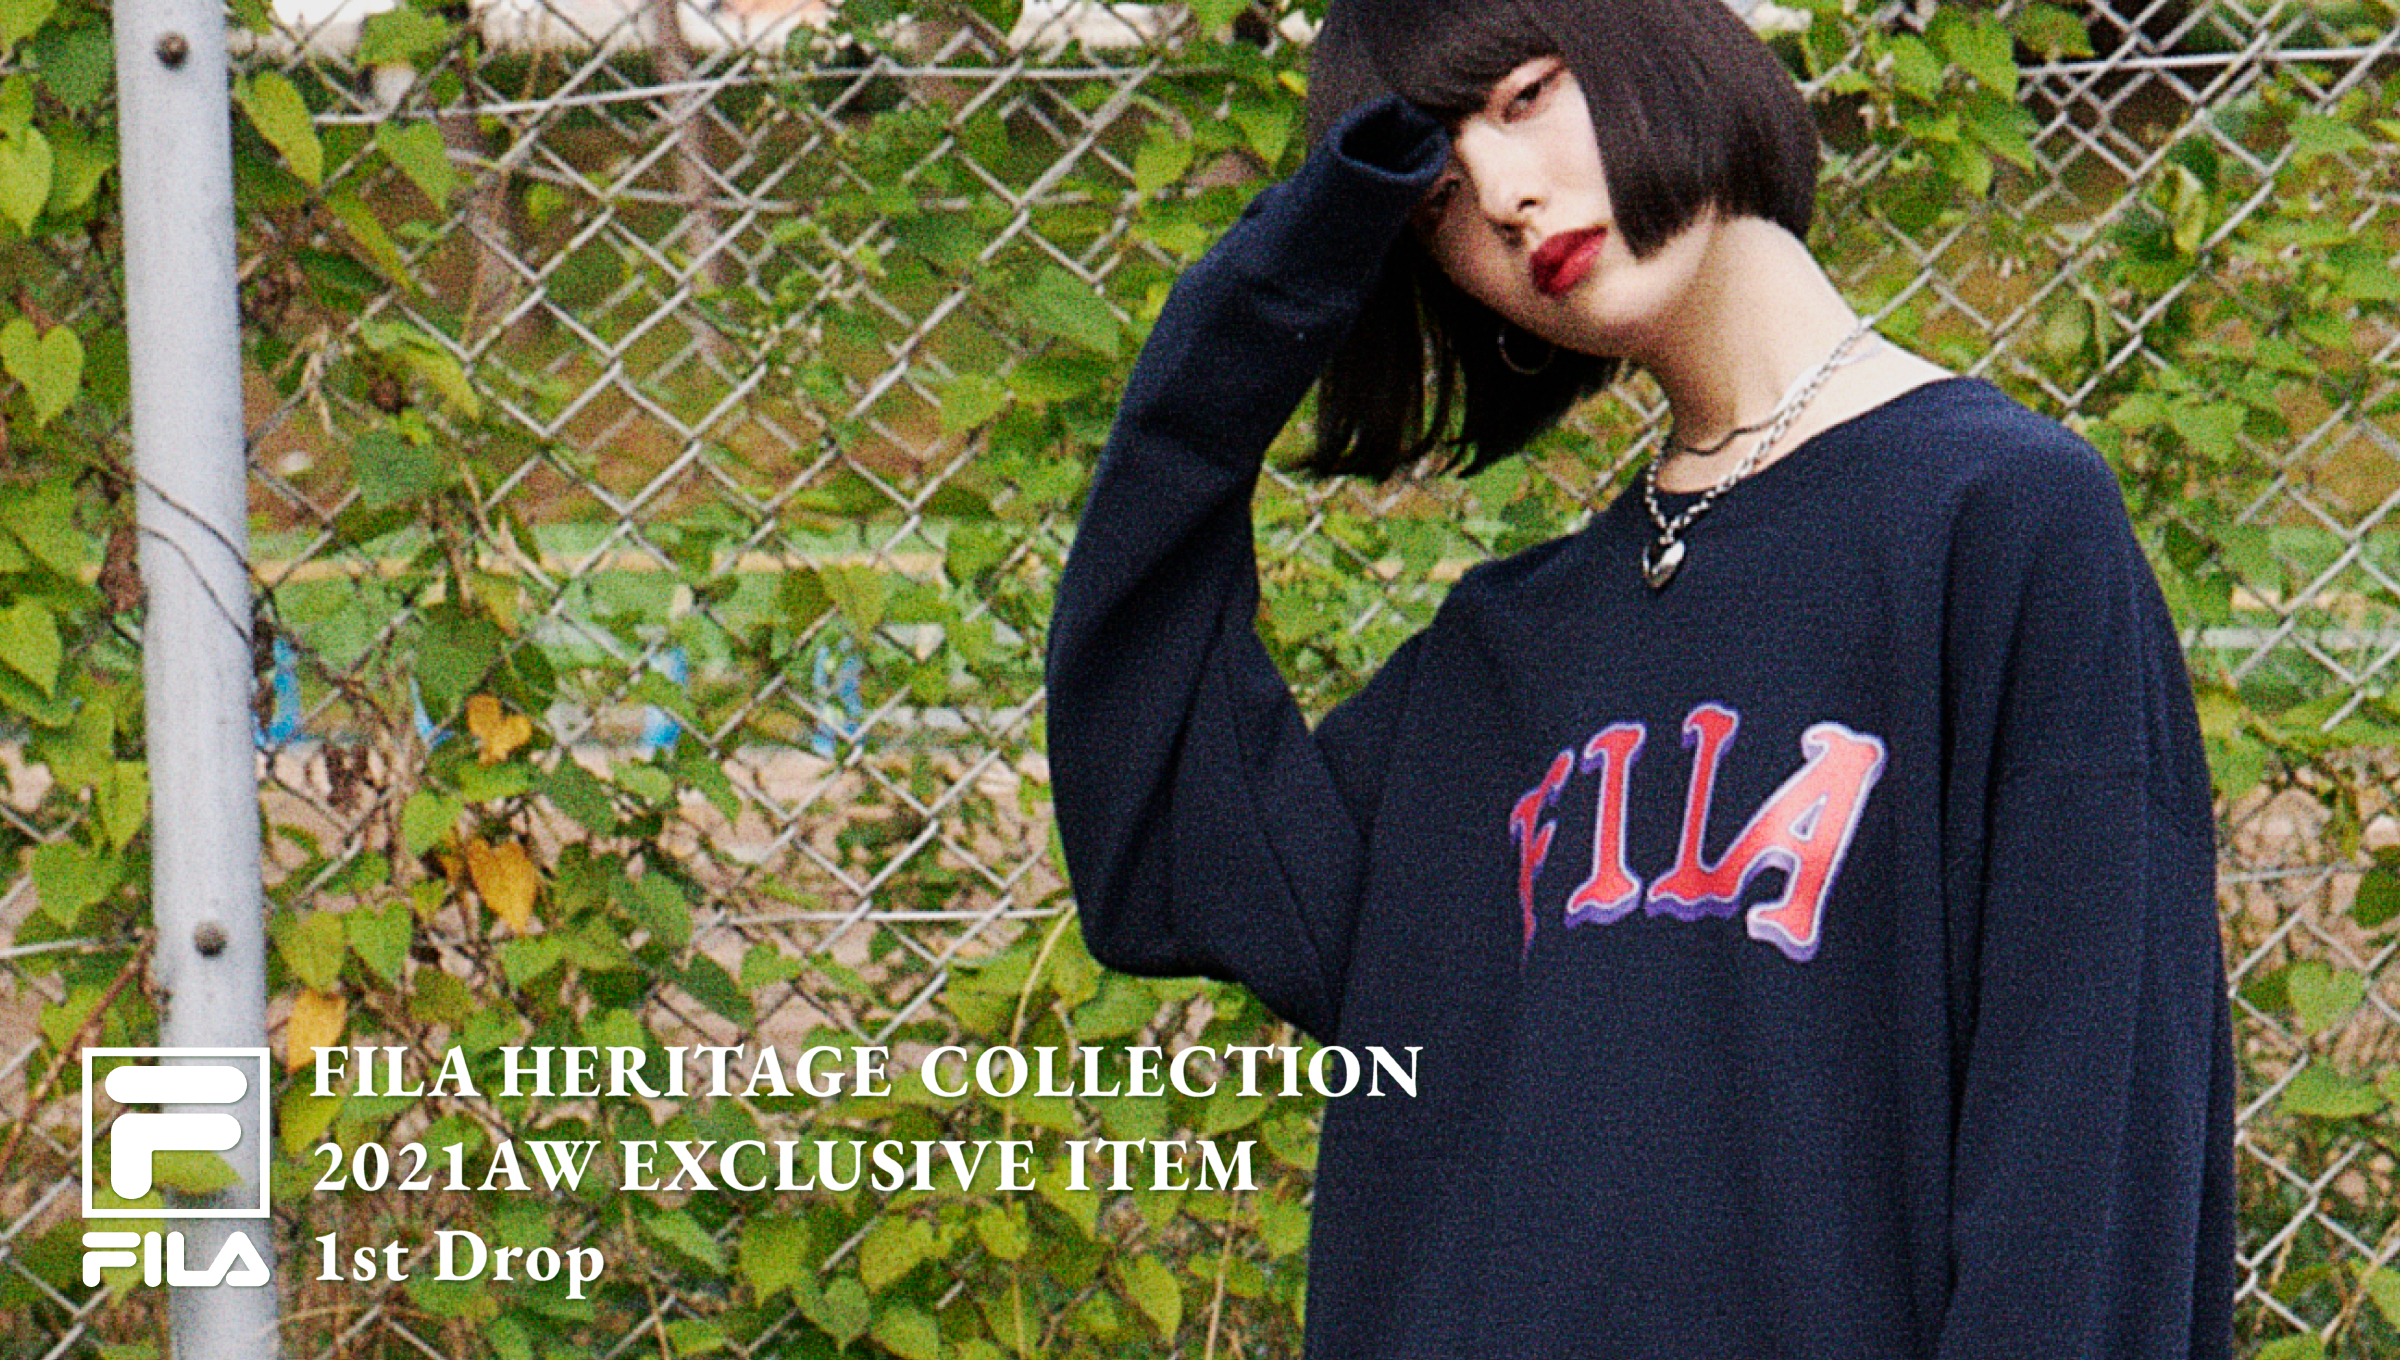 FILA 2021AW HERITAGE COLLECTION EXCLUSIVE ITEM